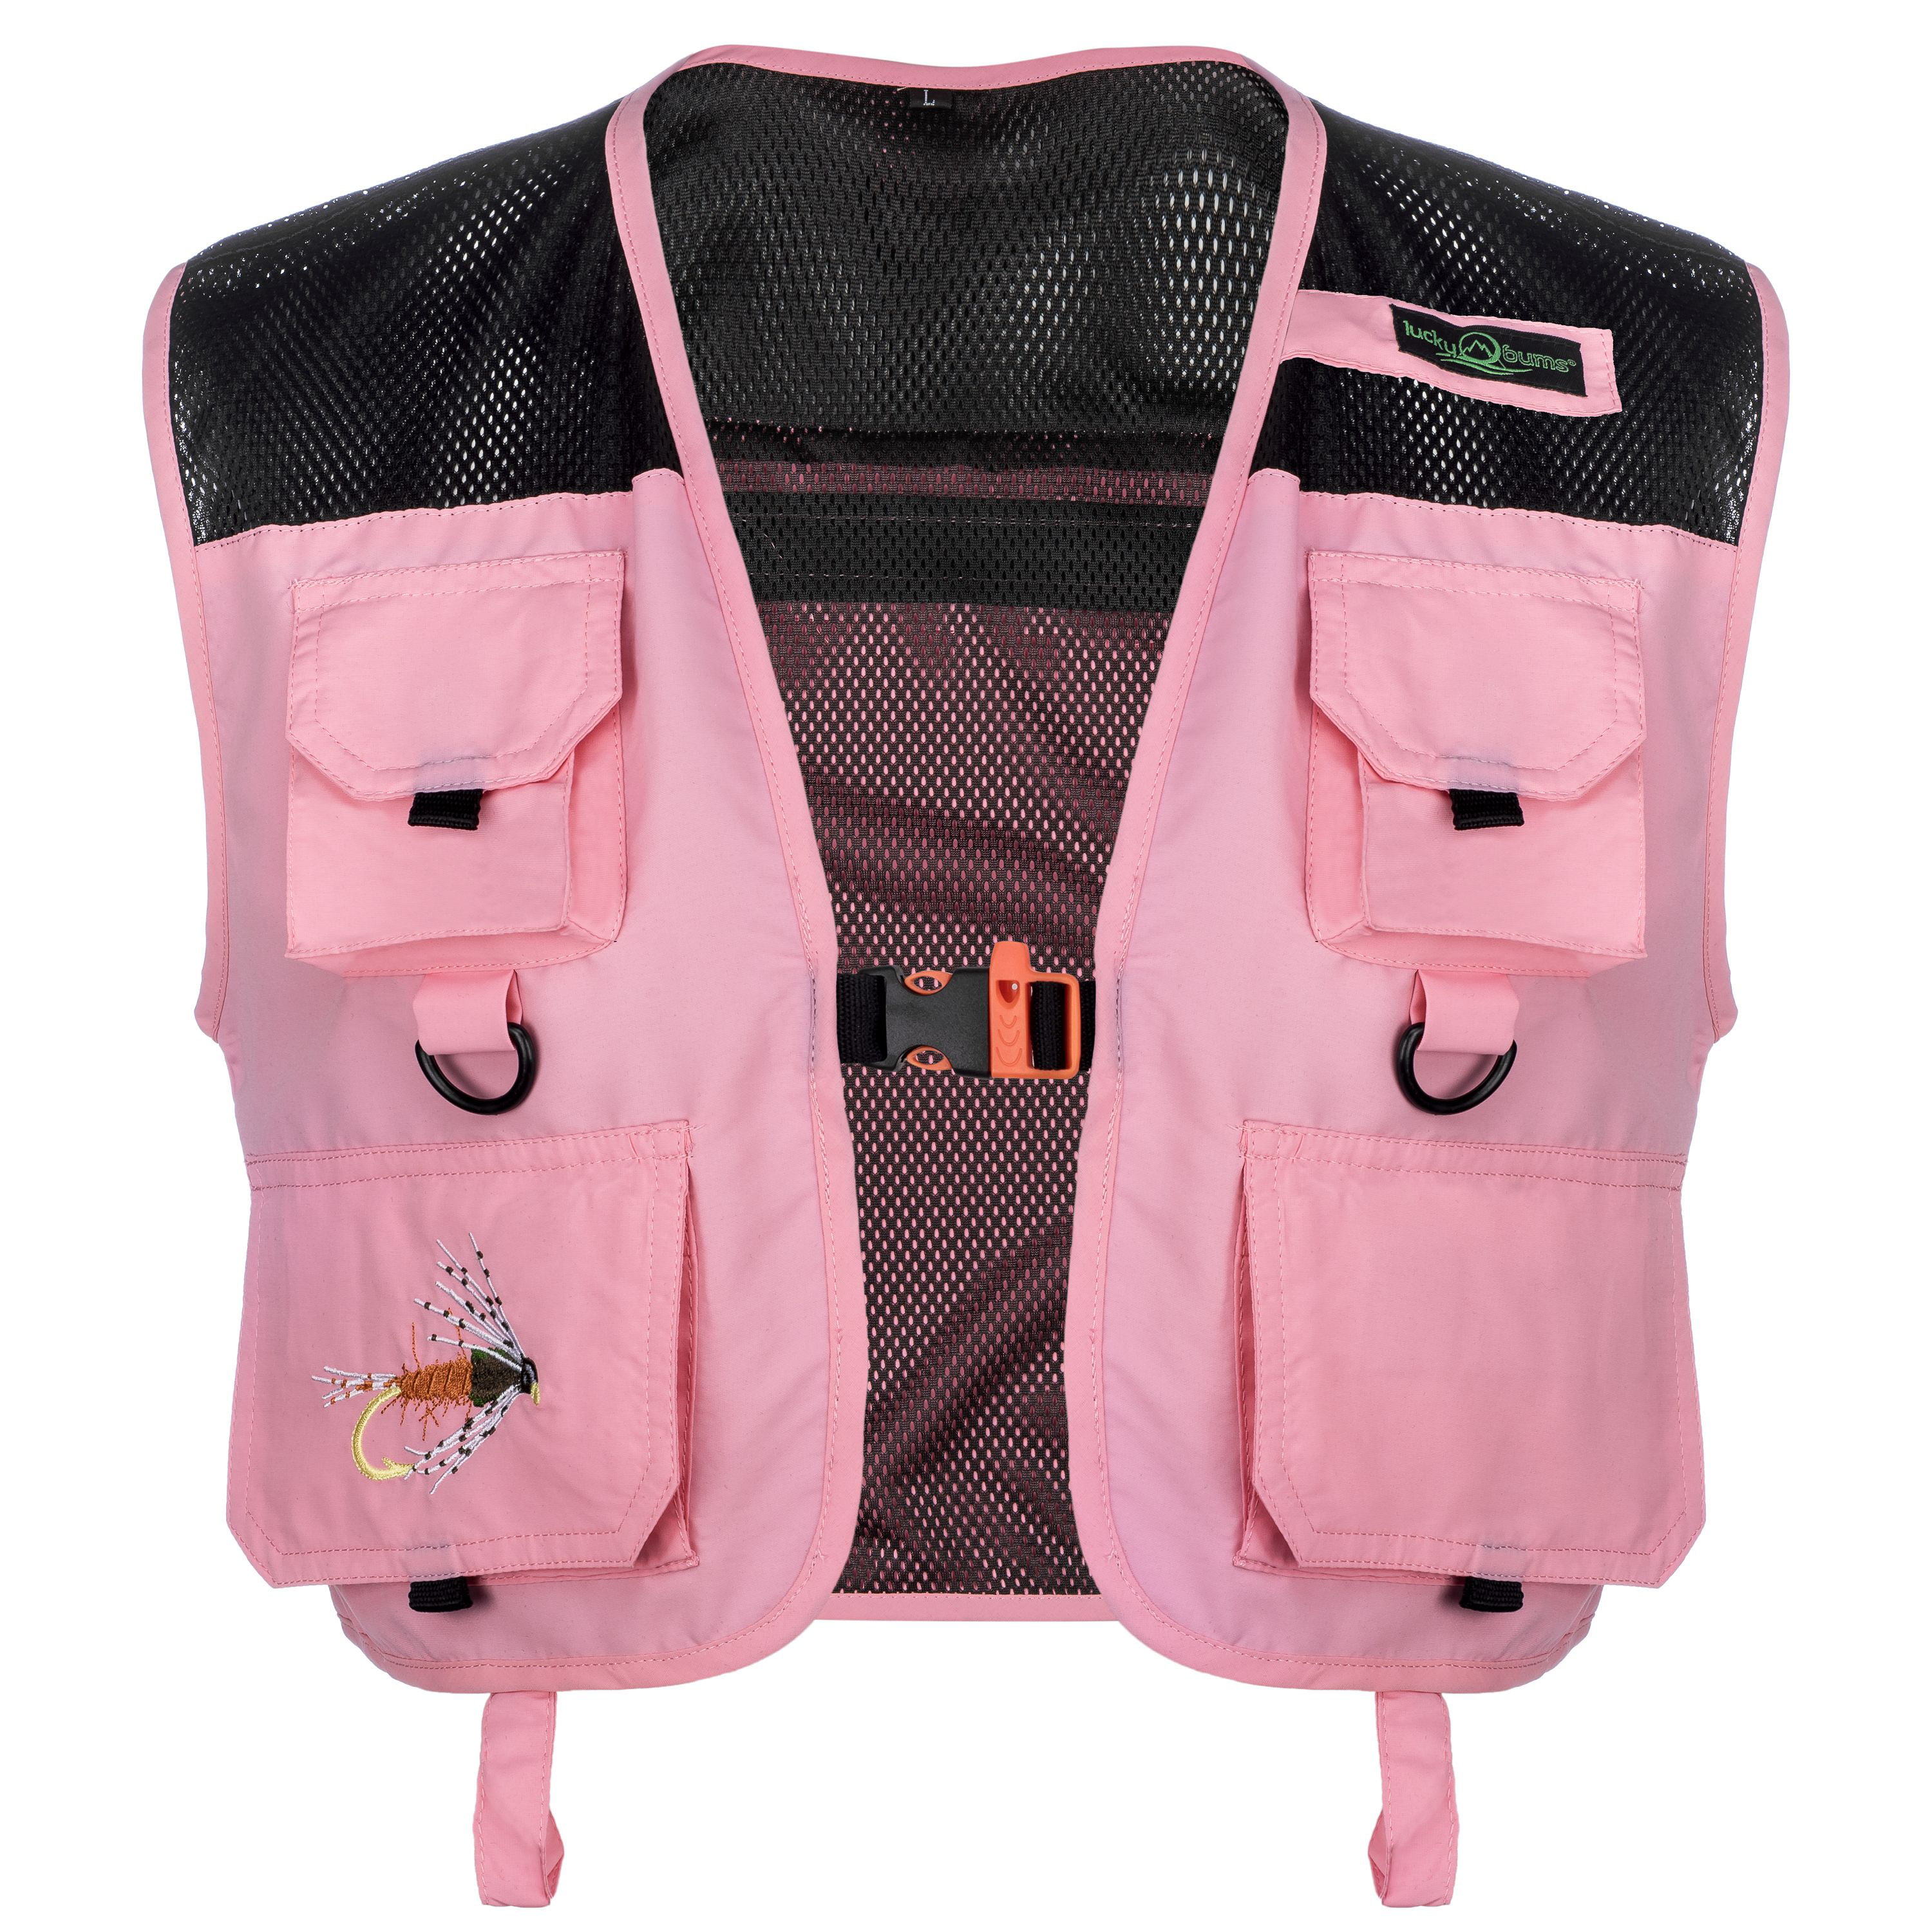 Lucky Bums Kid's Fishing and Outdoor Adventure Vest, Pink, Large 